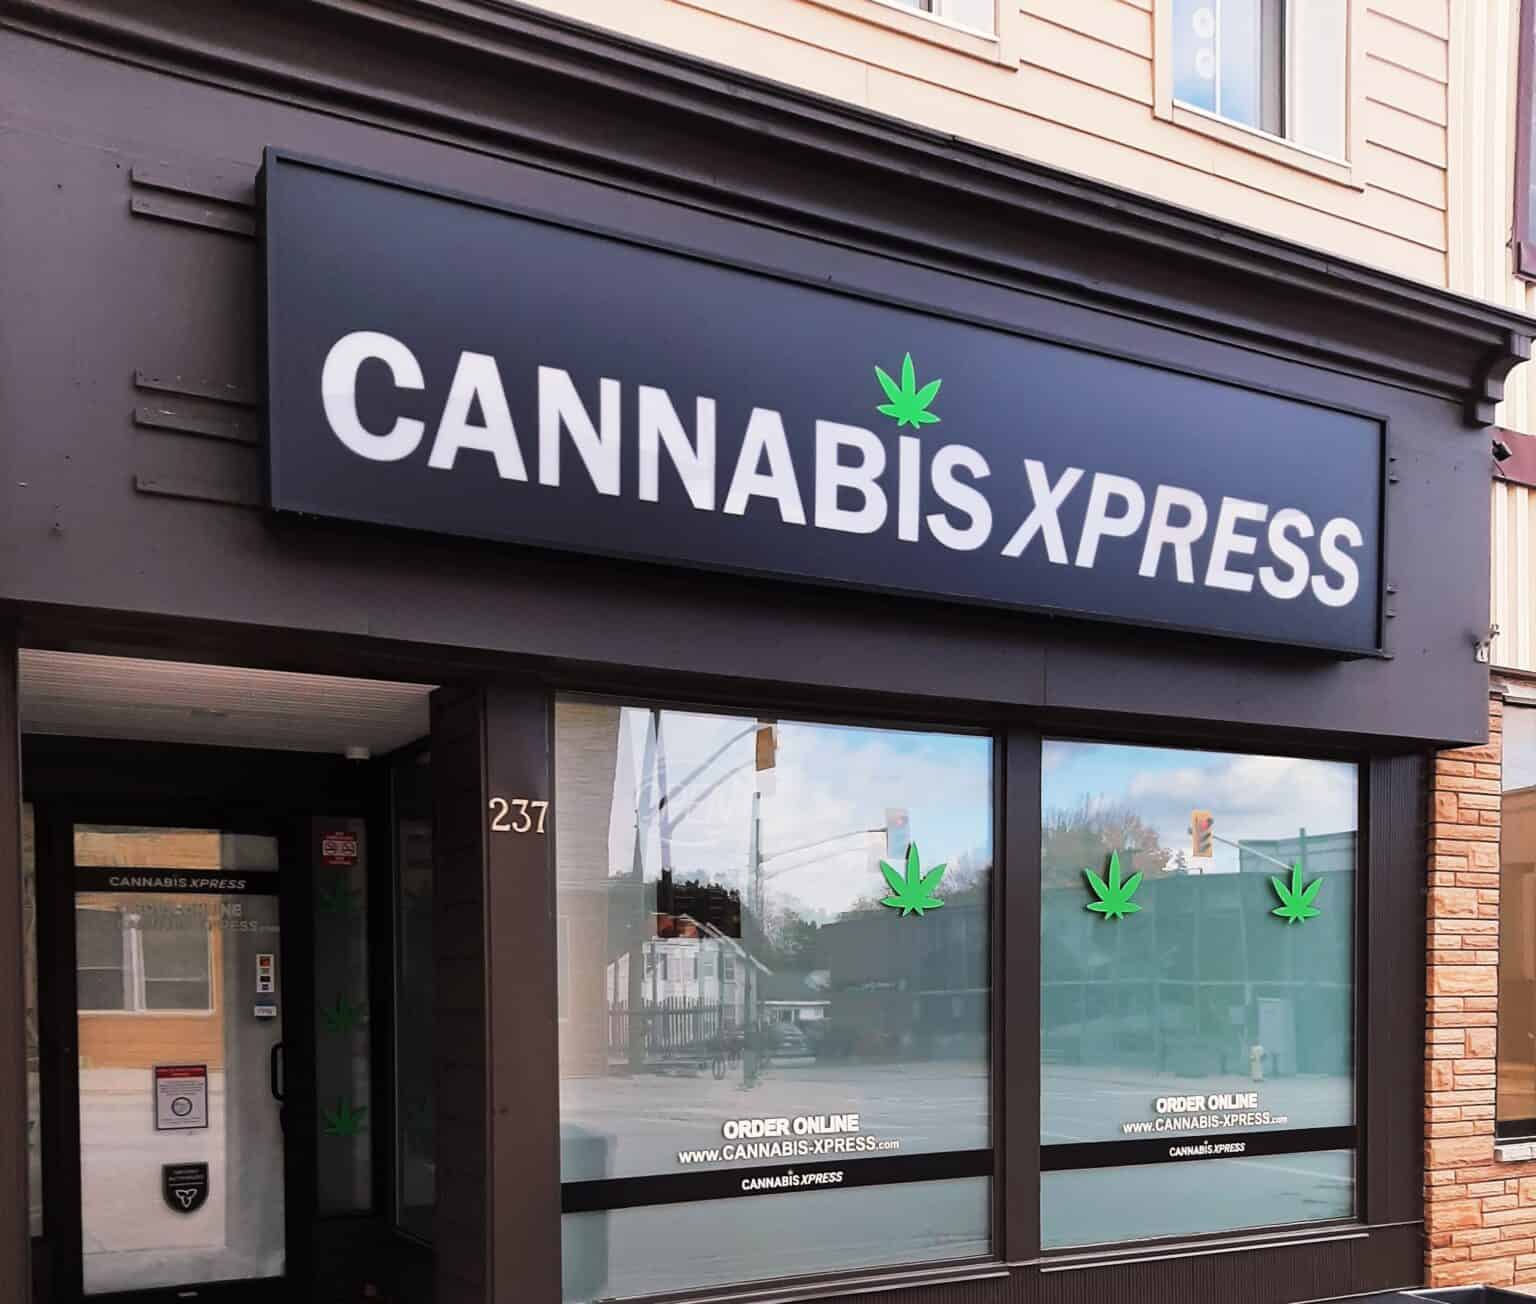 Ontario Cannabis Retailer Fined $200,000 for Violating Anti-Inducement Law